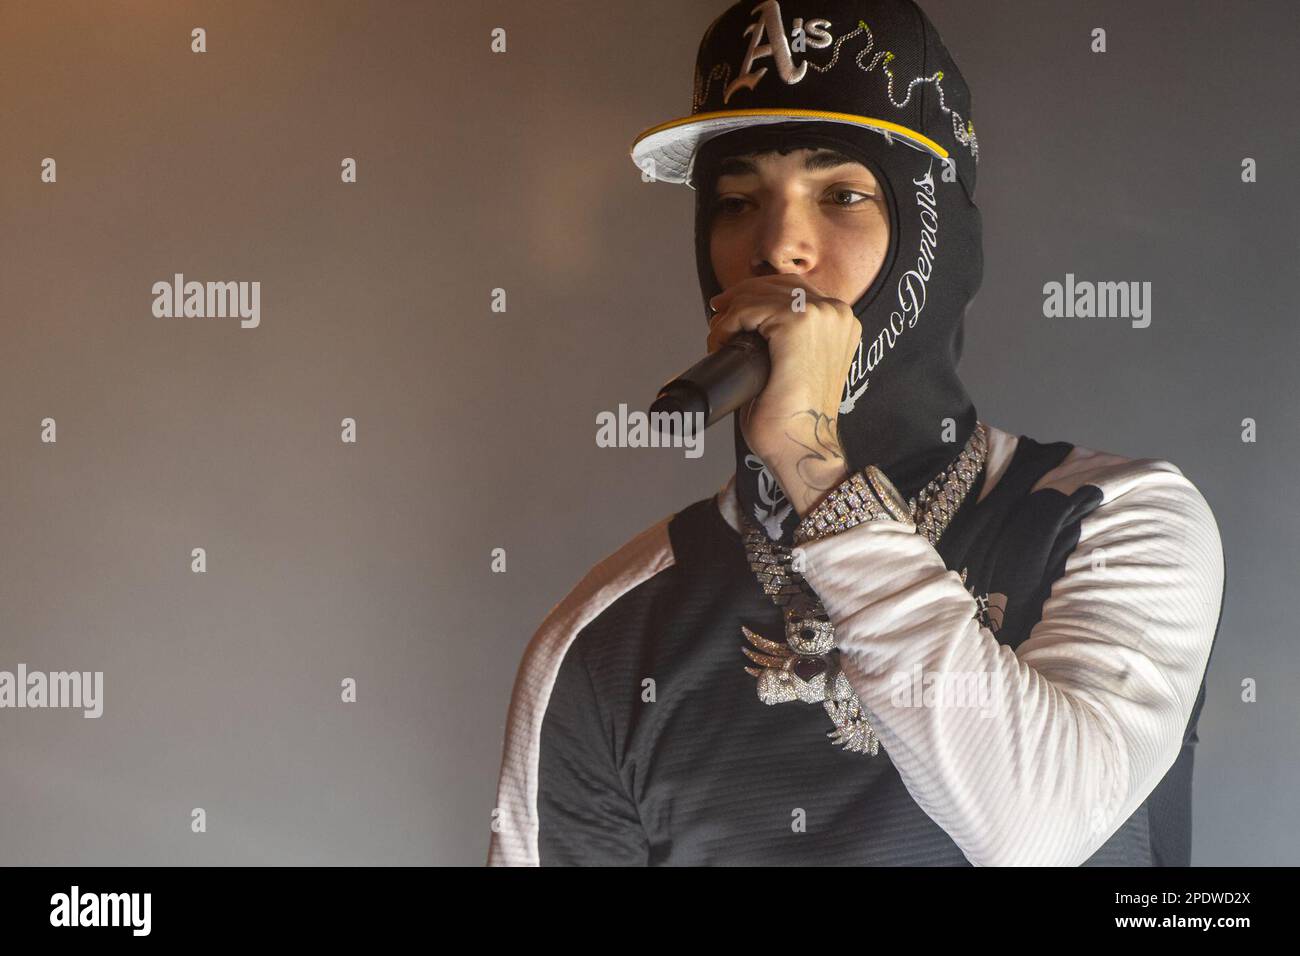 March 14, 2023, Italy: Italian rap/hip hop singer Shiva during the Milano  Demons Live Tour concert, held at the Orion live club in Rome, Italy on  March 14, 2023, Claudio Enea/Sport Reporter. (